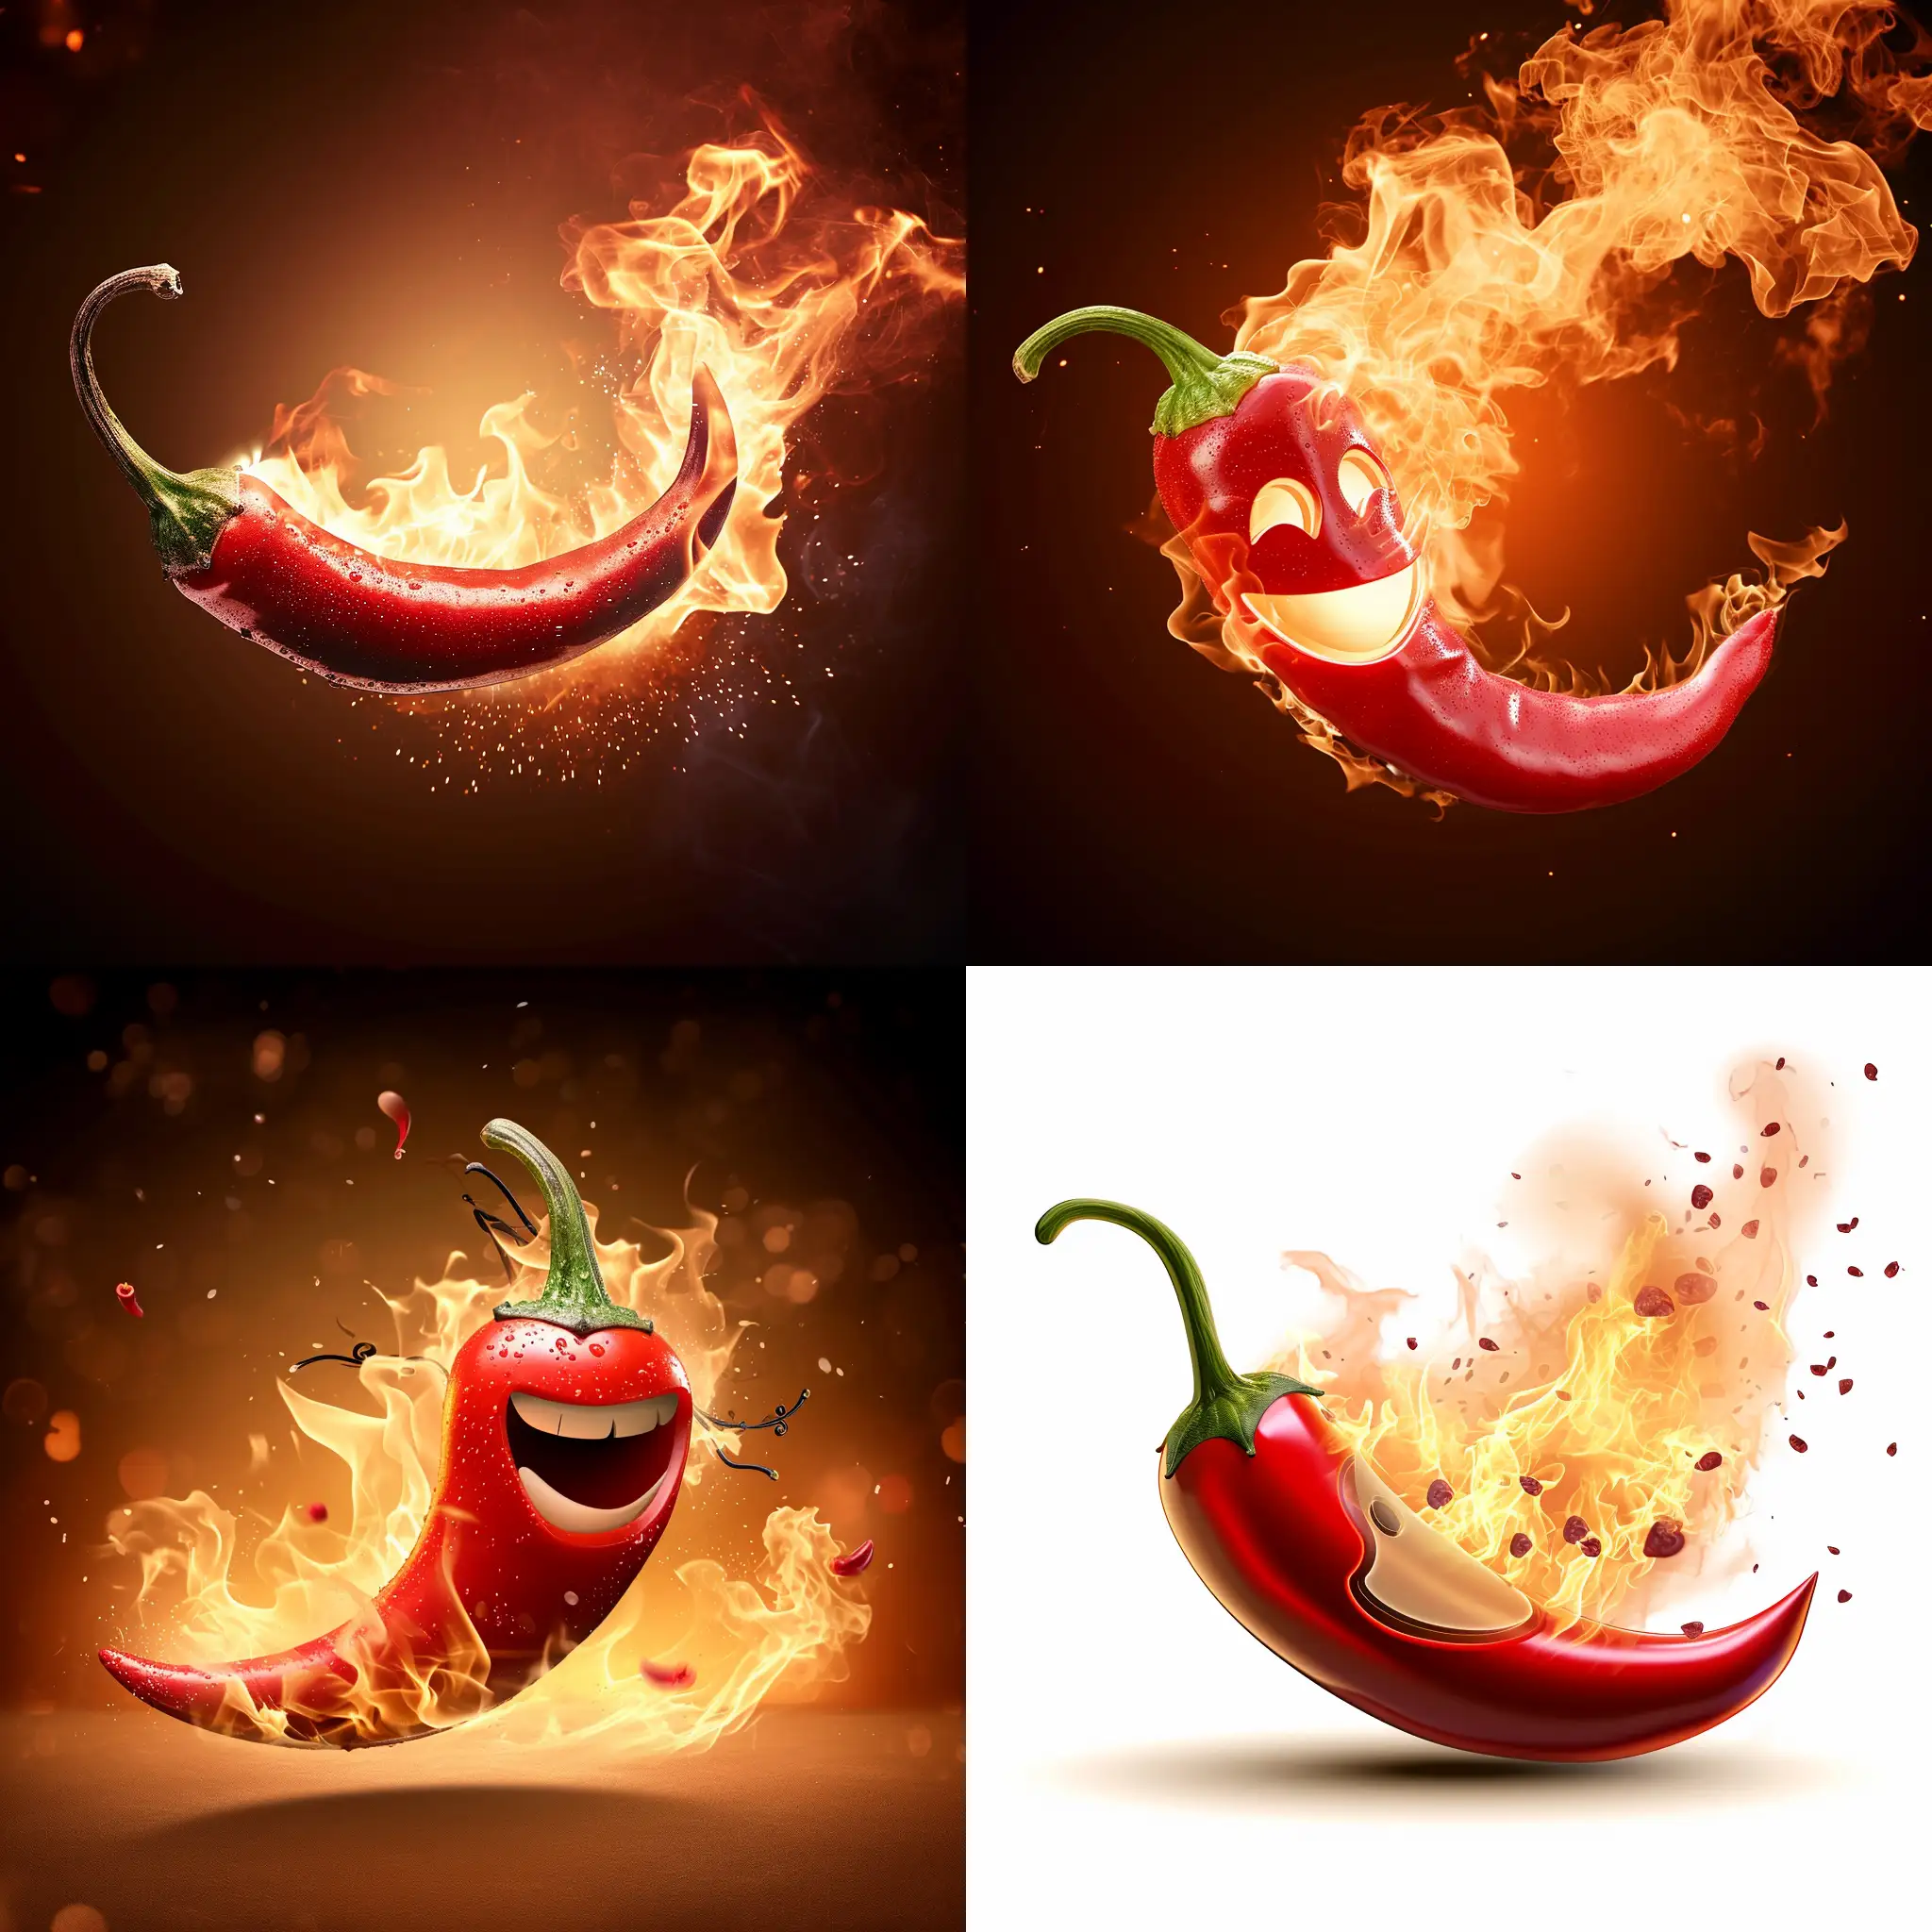 Spicy-Chili-Pepper-in-Fiery-Display